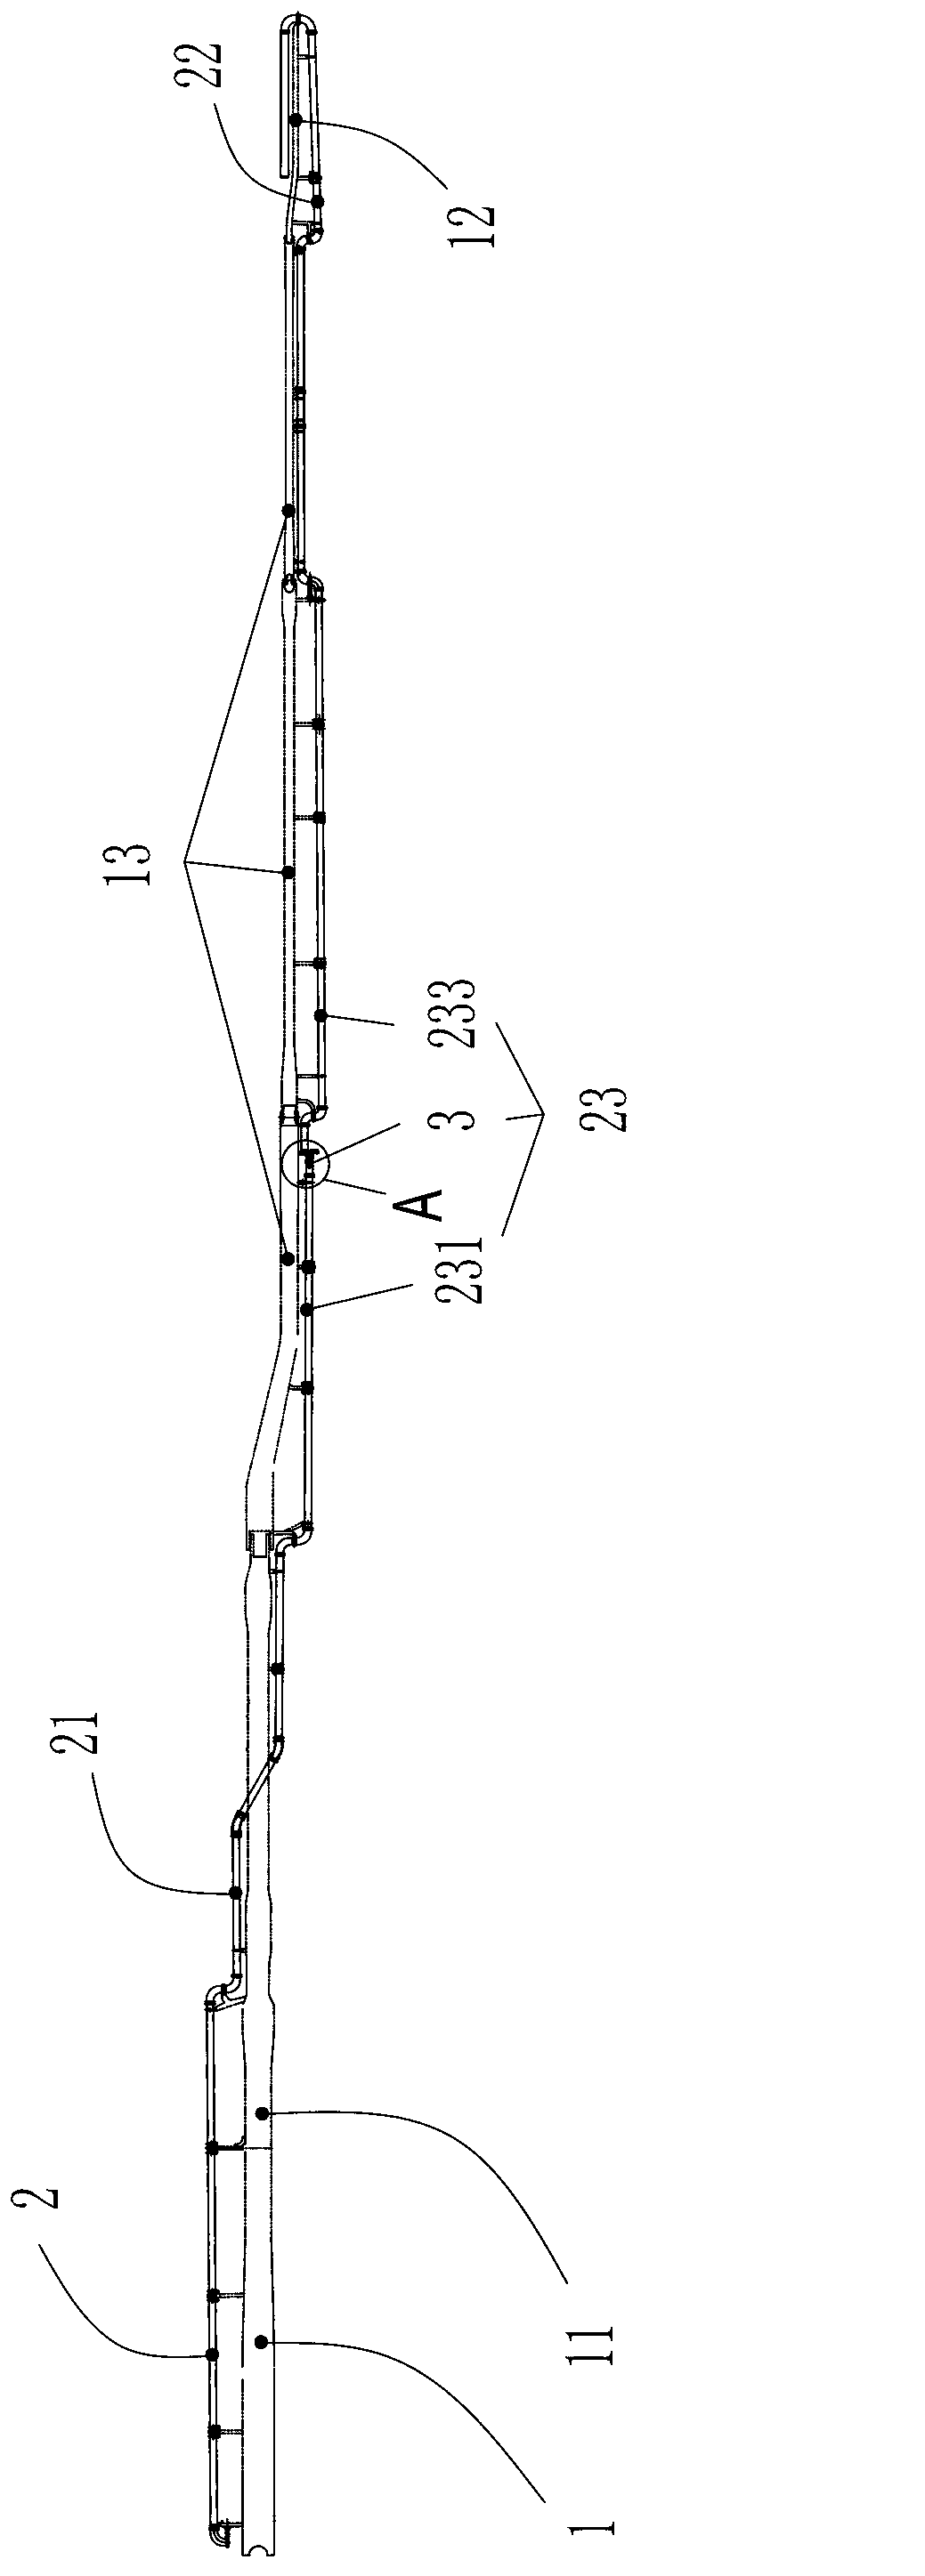 Conveying pipeline, boom system and operating equipment